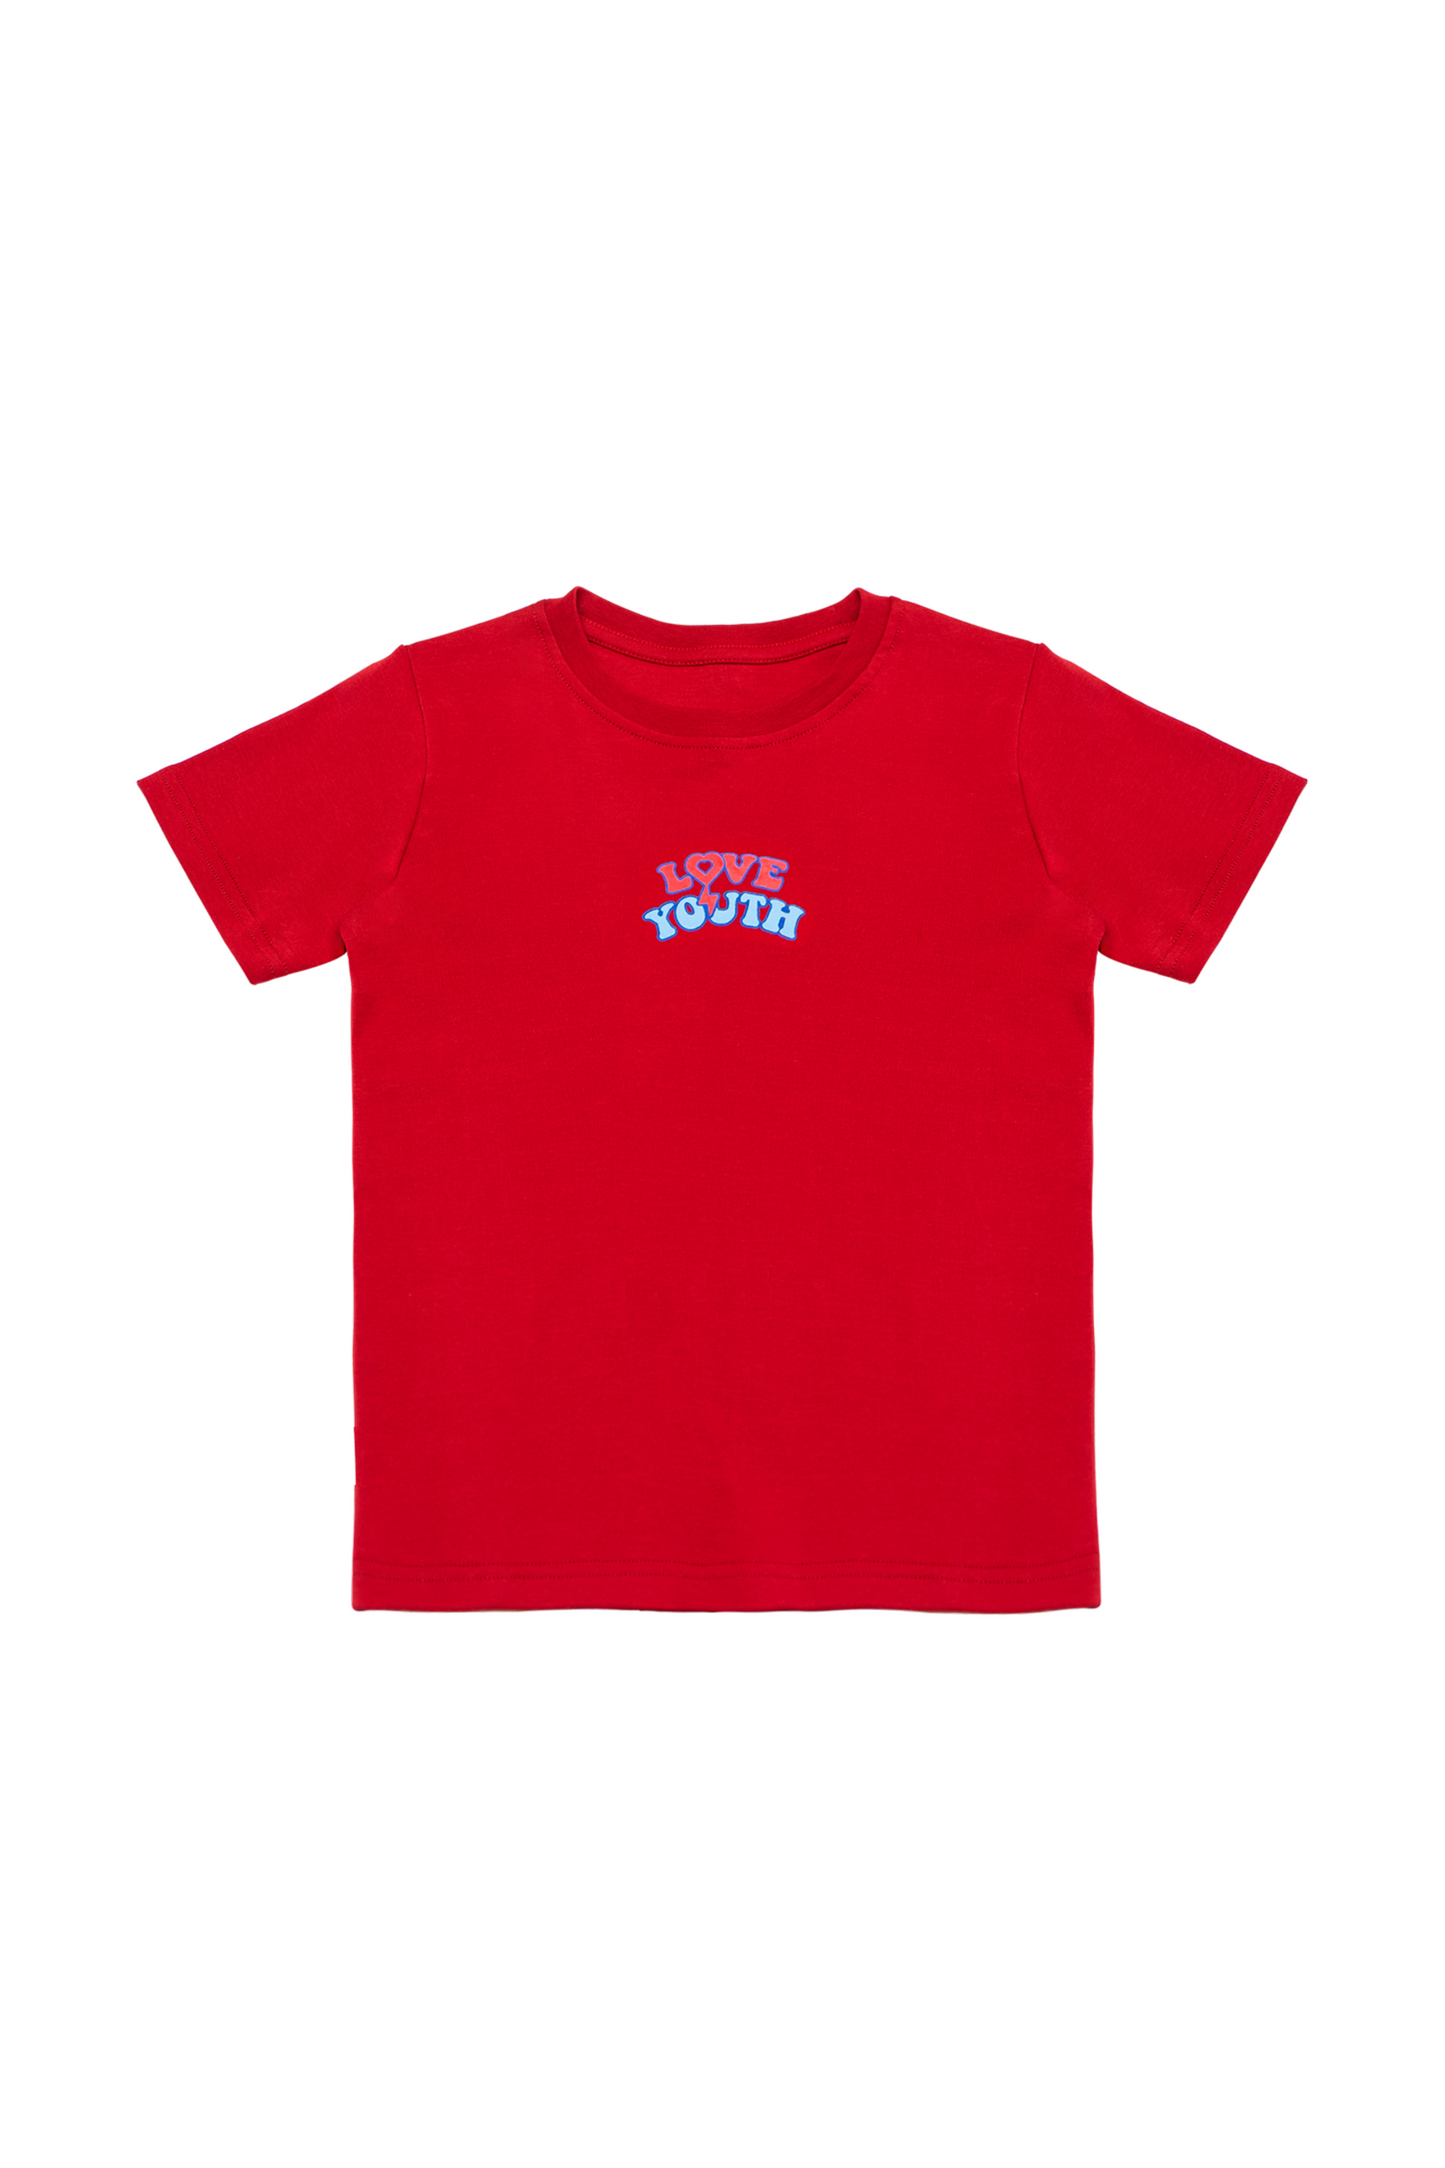 Love & Youth- Red Kids T-shirt